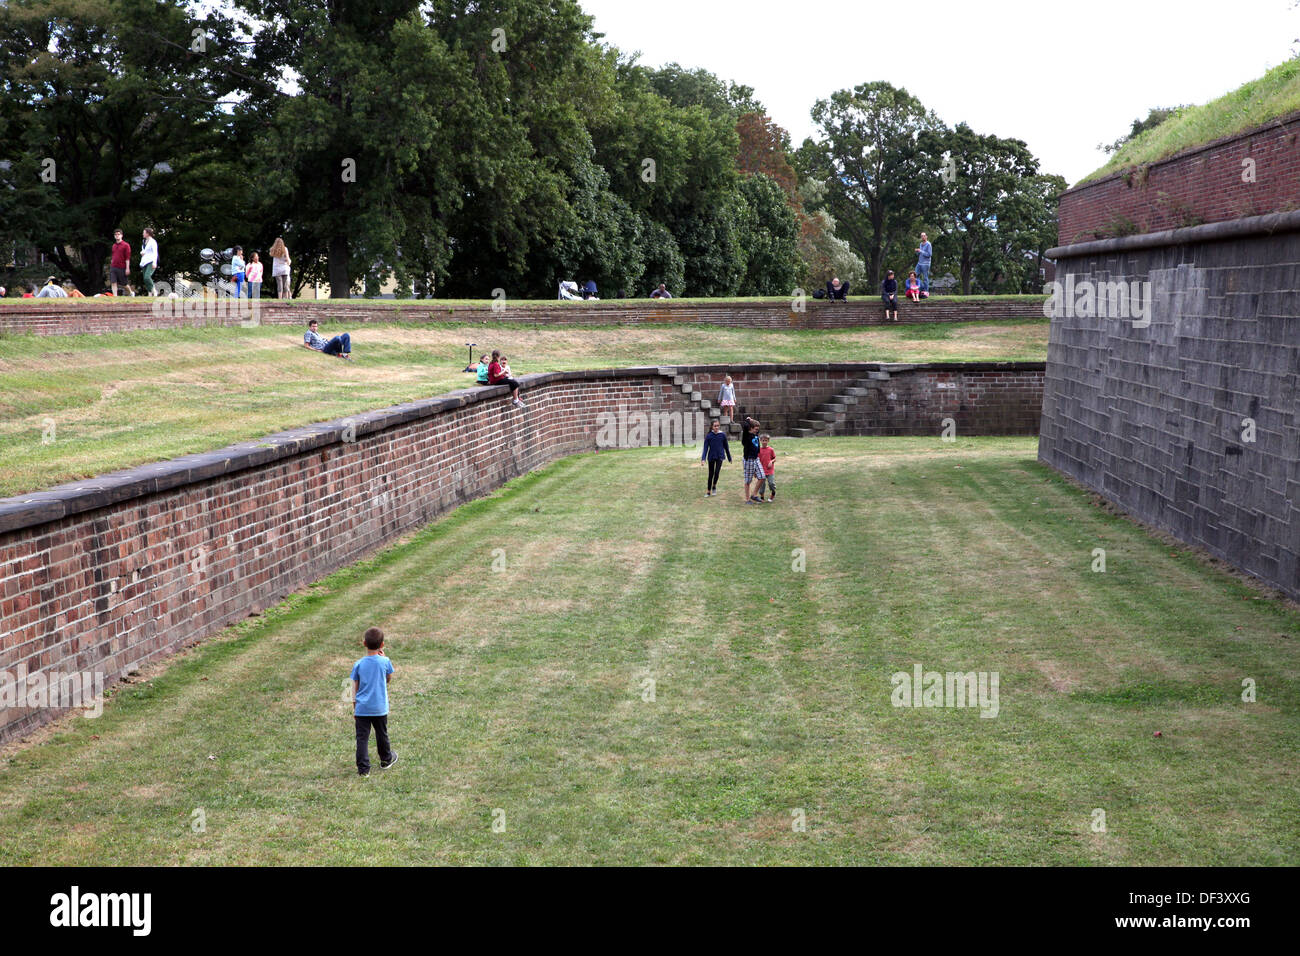 Grass moat of Fort Jay, Governors Island, New York, NY Stock Photo